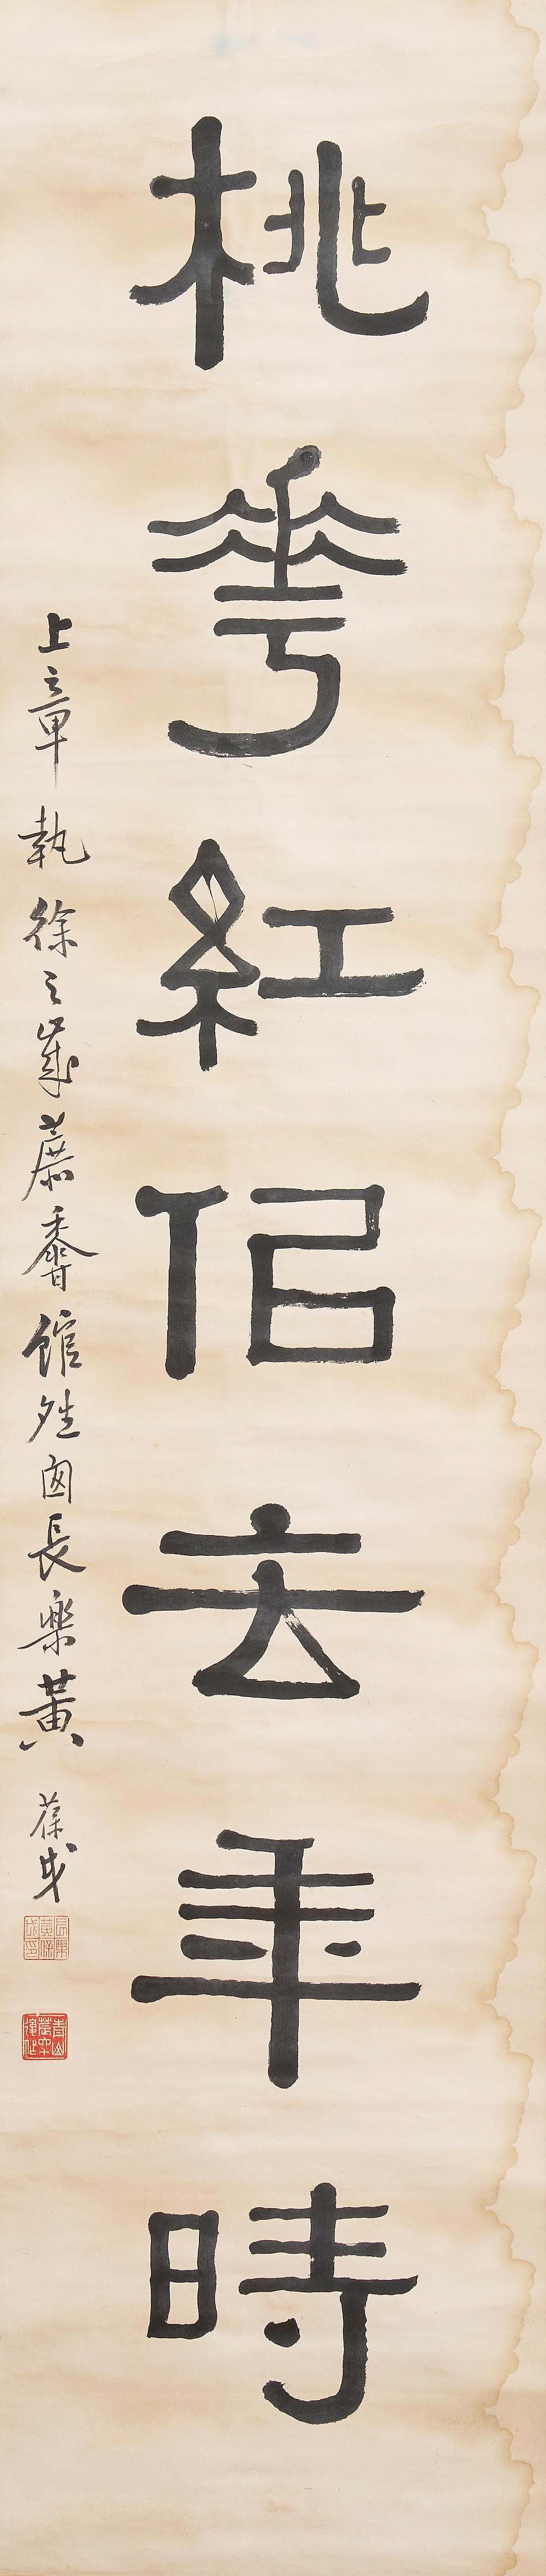 Huang Baoyue (1880-1968) Calligraphy Couplet in Clerical Script (2) - Image 2 of 3